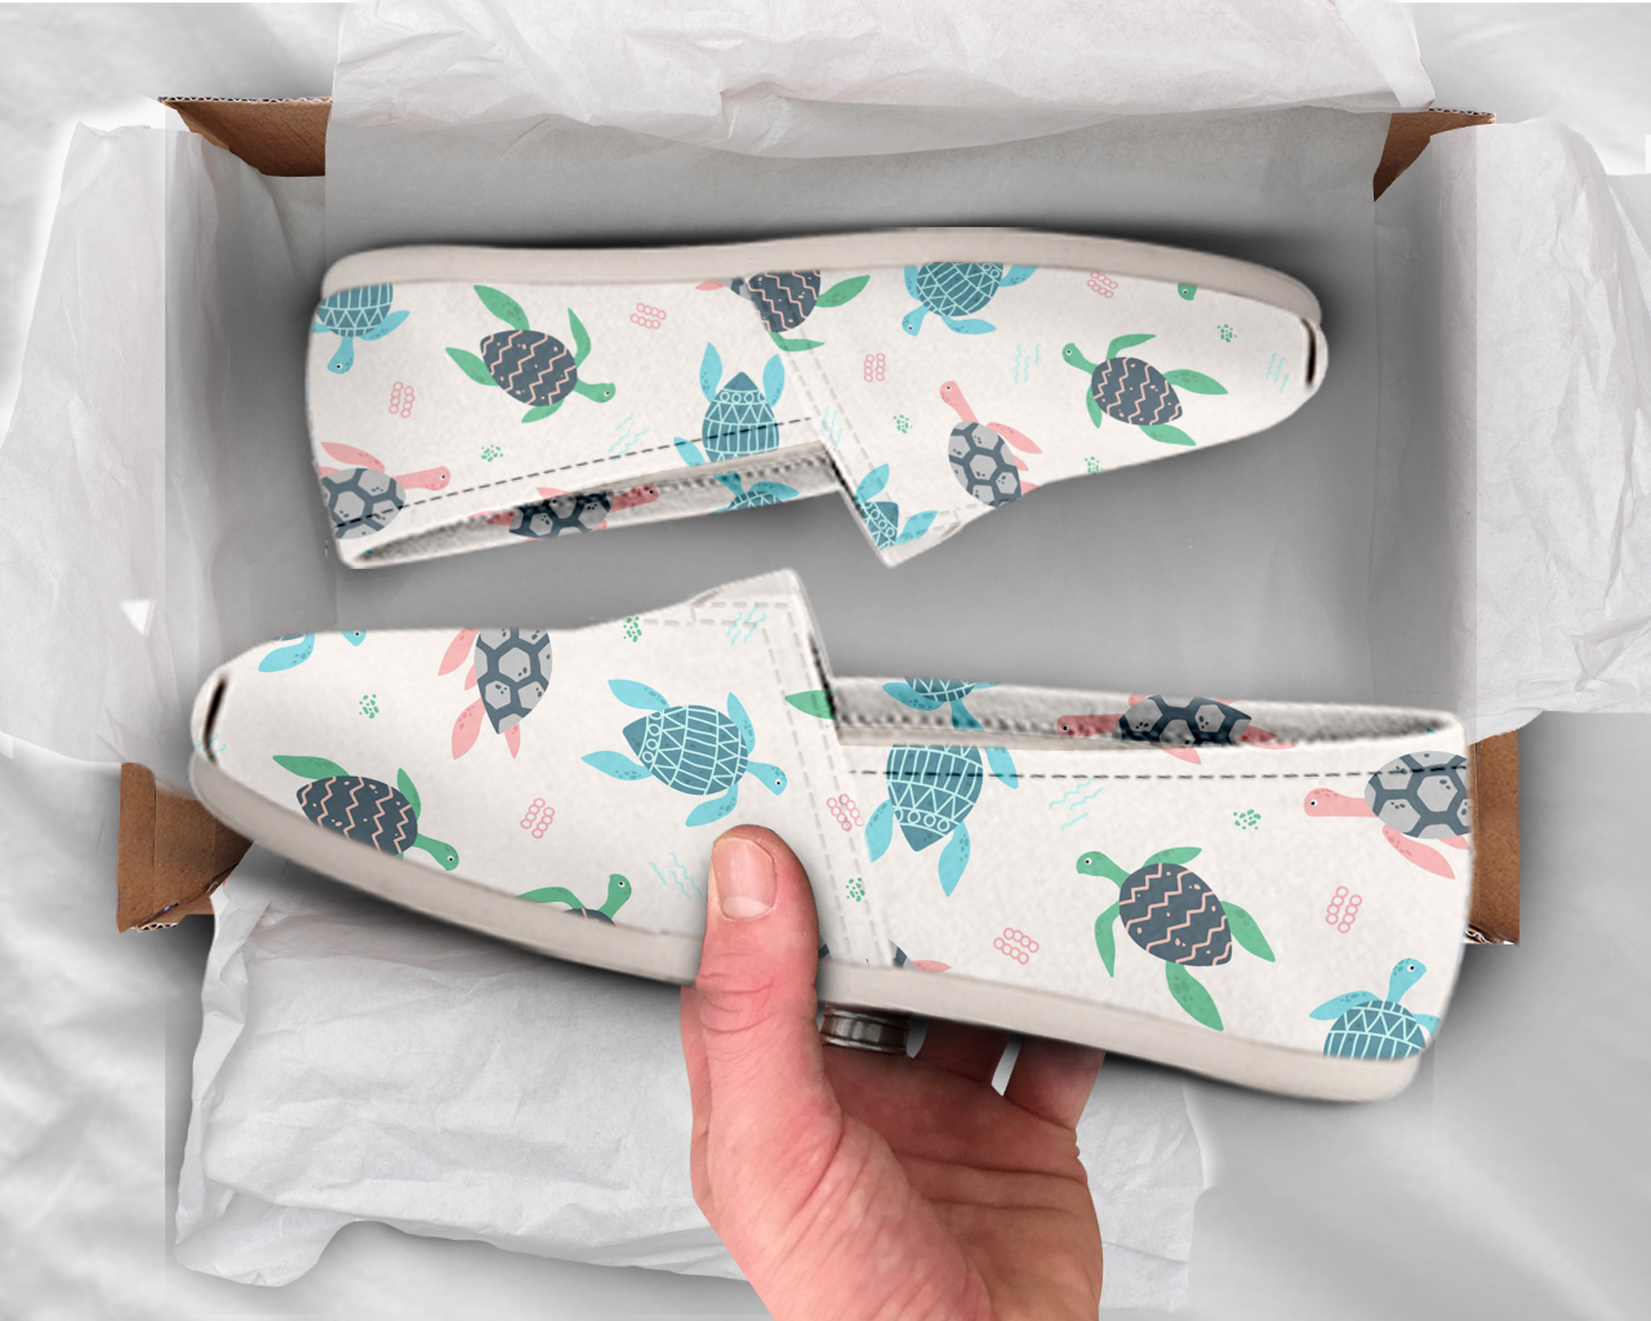 Slip-On Turtle Shoes | Custom Canvas Sneakers For Kids & Adults